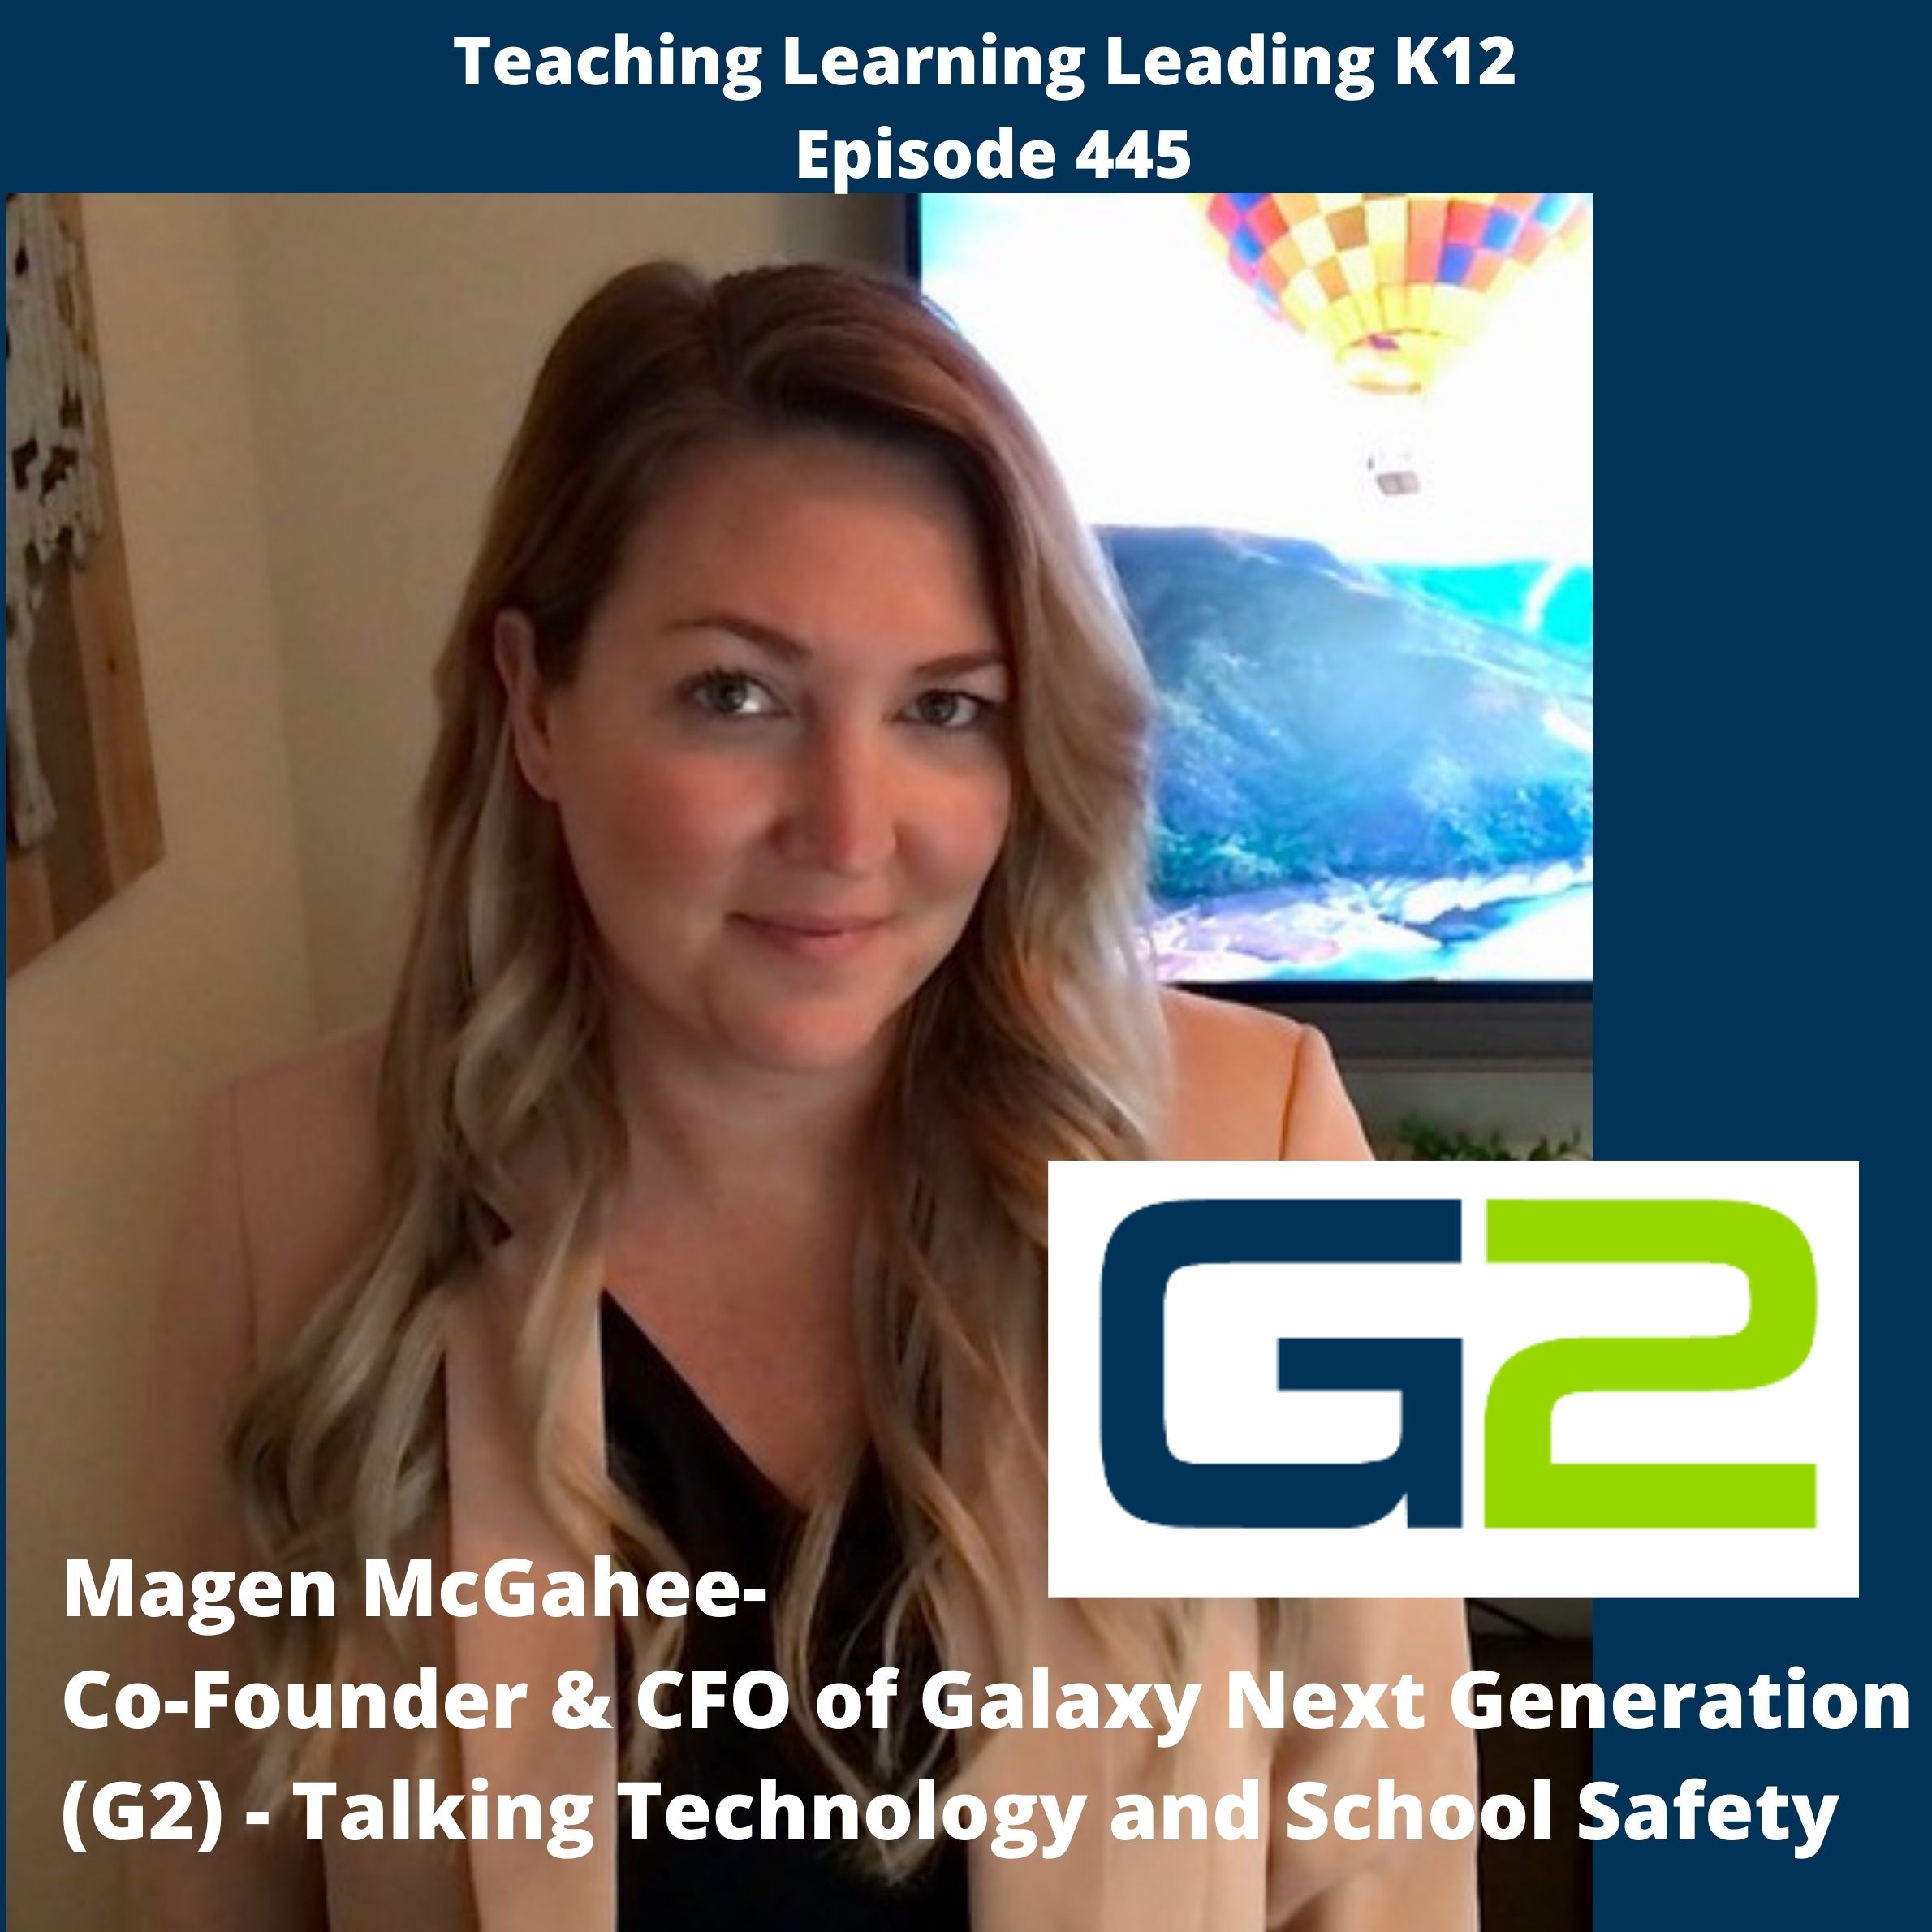 Magen McGahee - Co-Founder and CFO of Galaxy Next Generation or G2 - Talking Technology and School Safety - 445 Image